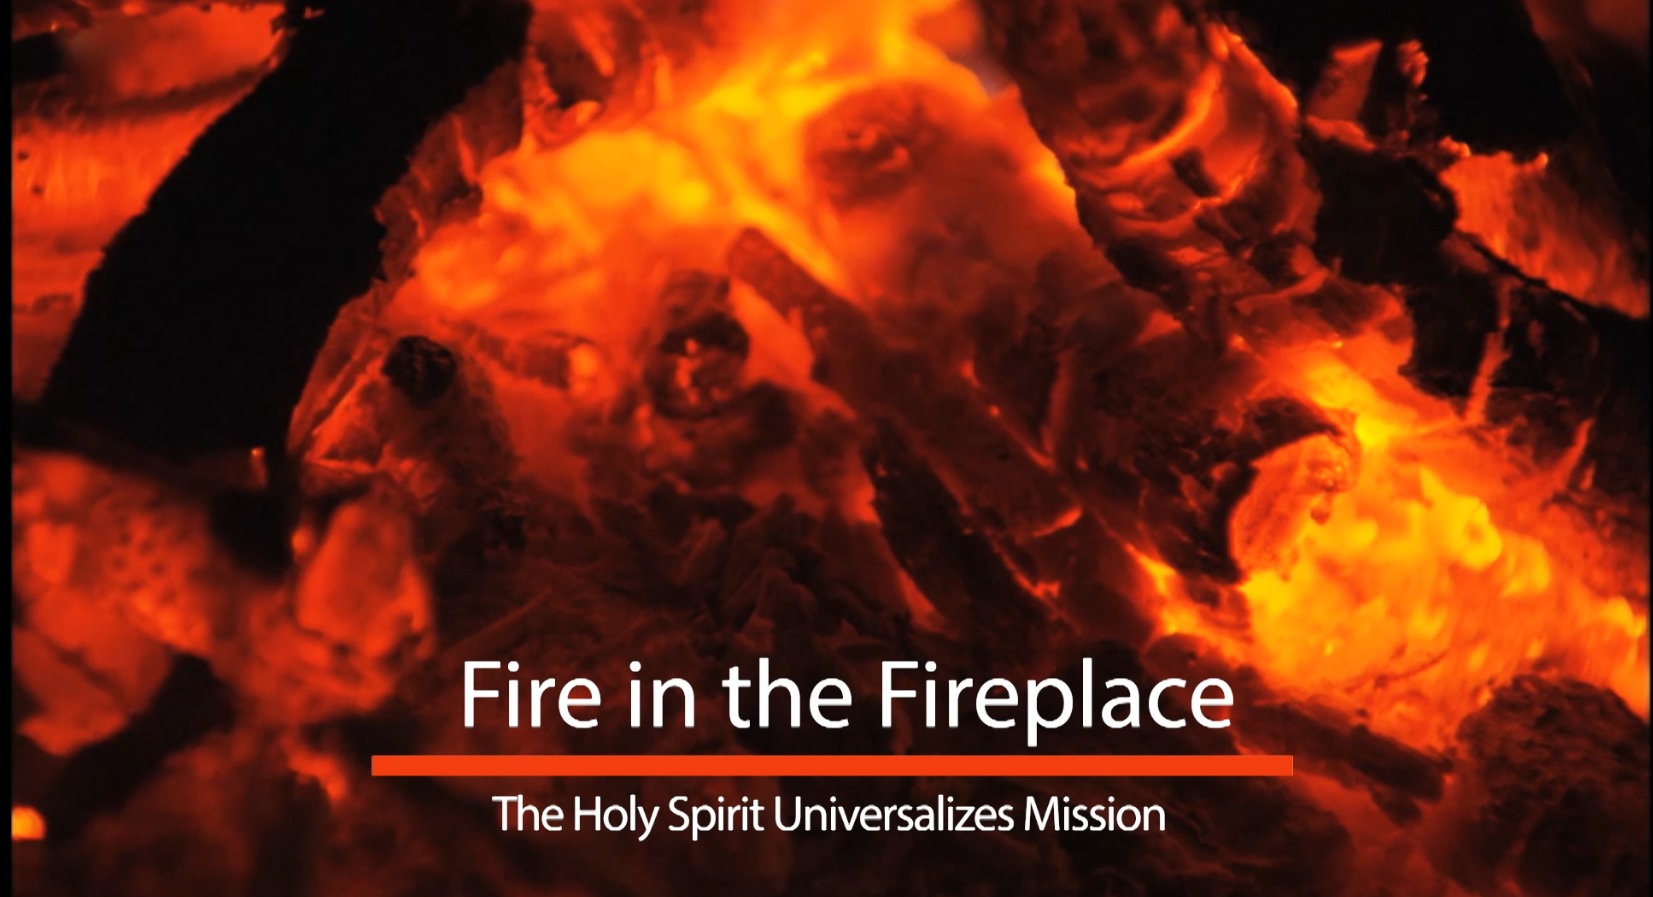 Fire in the Fireplace: the Holy Spirit Universalizes Mission